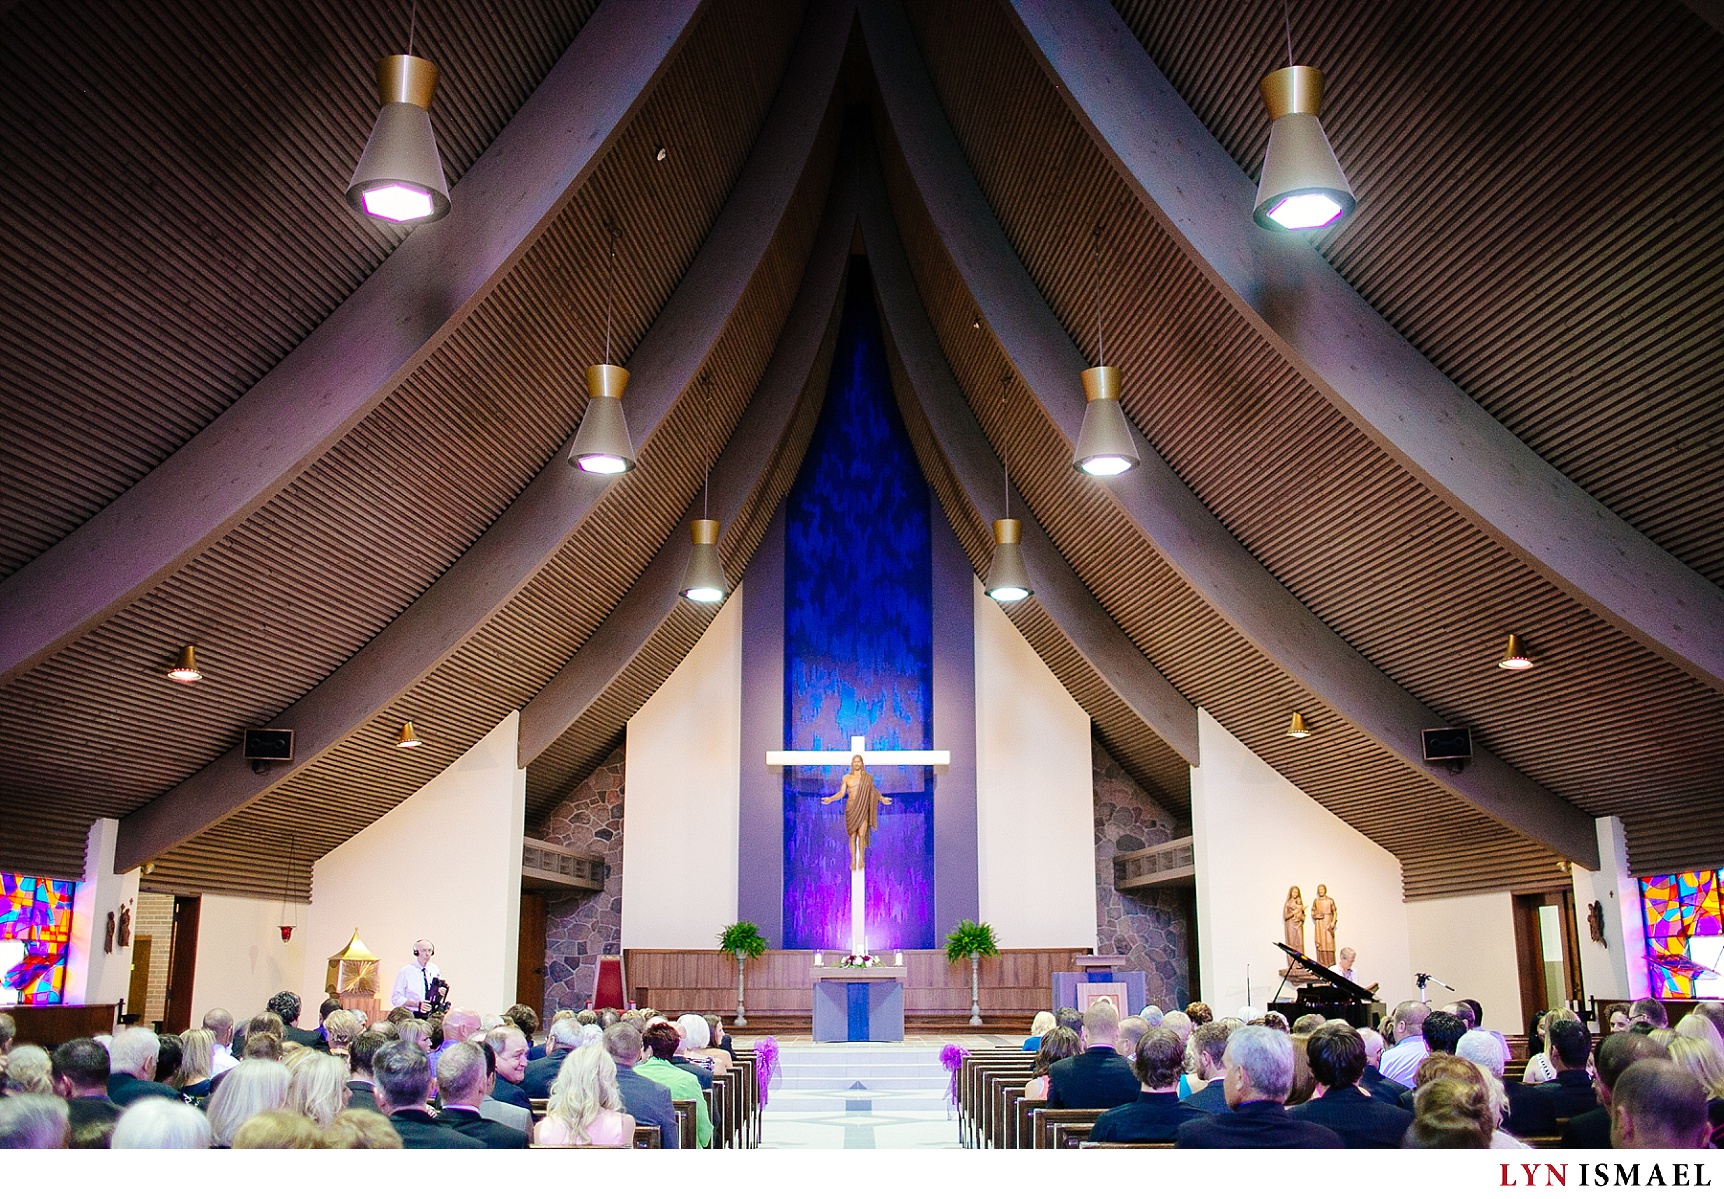 The interior of St Michael's church in Waterloo, Ontario.